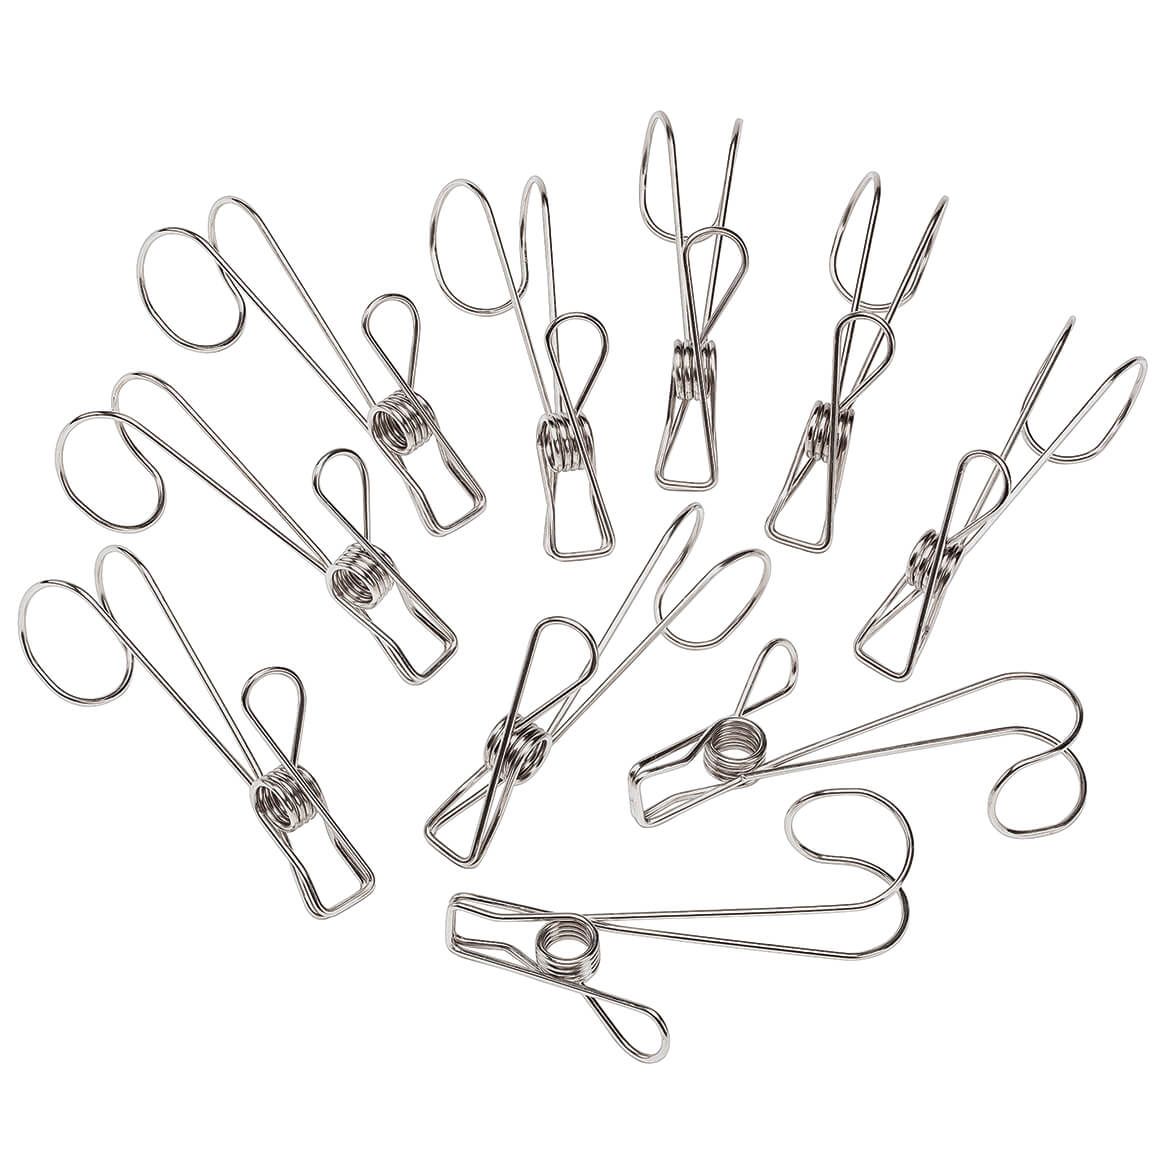 Stainless Steel Clothespin Hooks, Set of 12 + '-' + 374380